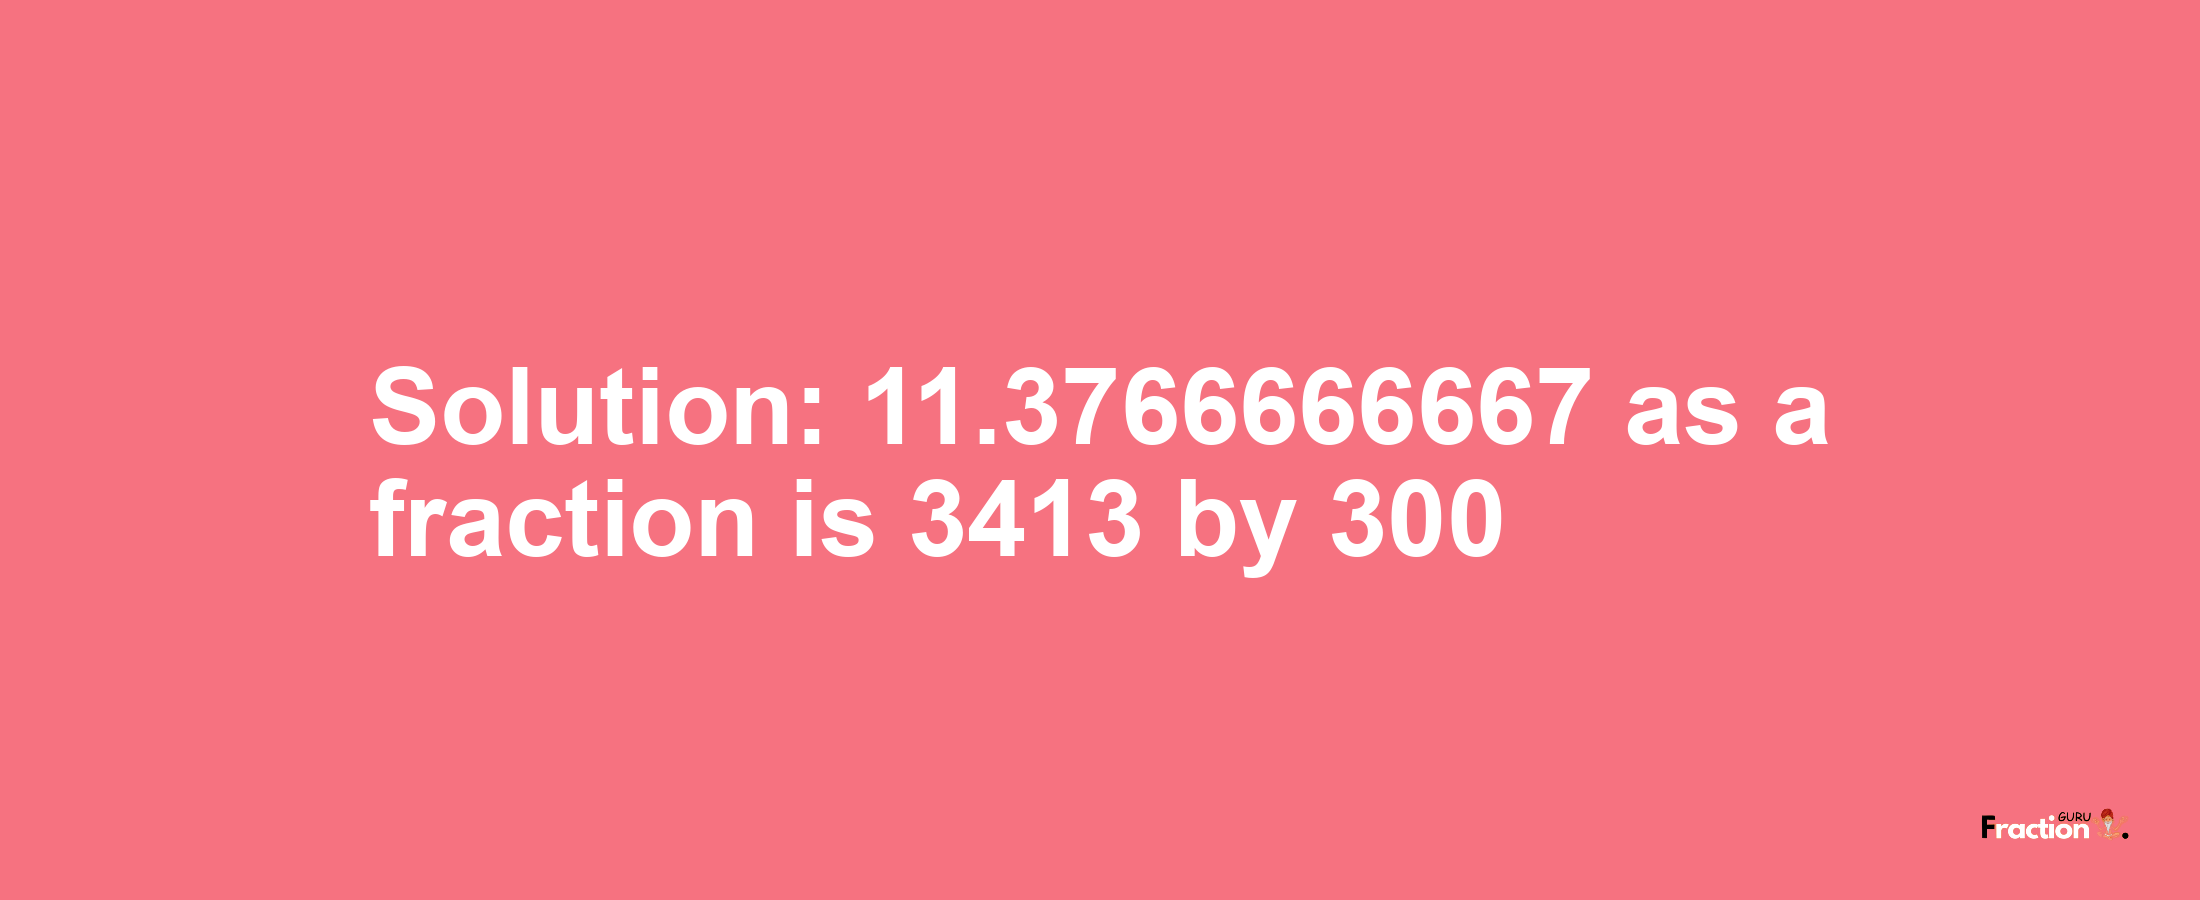 Solution:11.3766666667 as a fraction is 3413/300